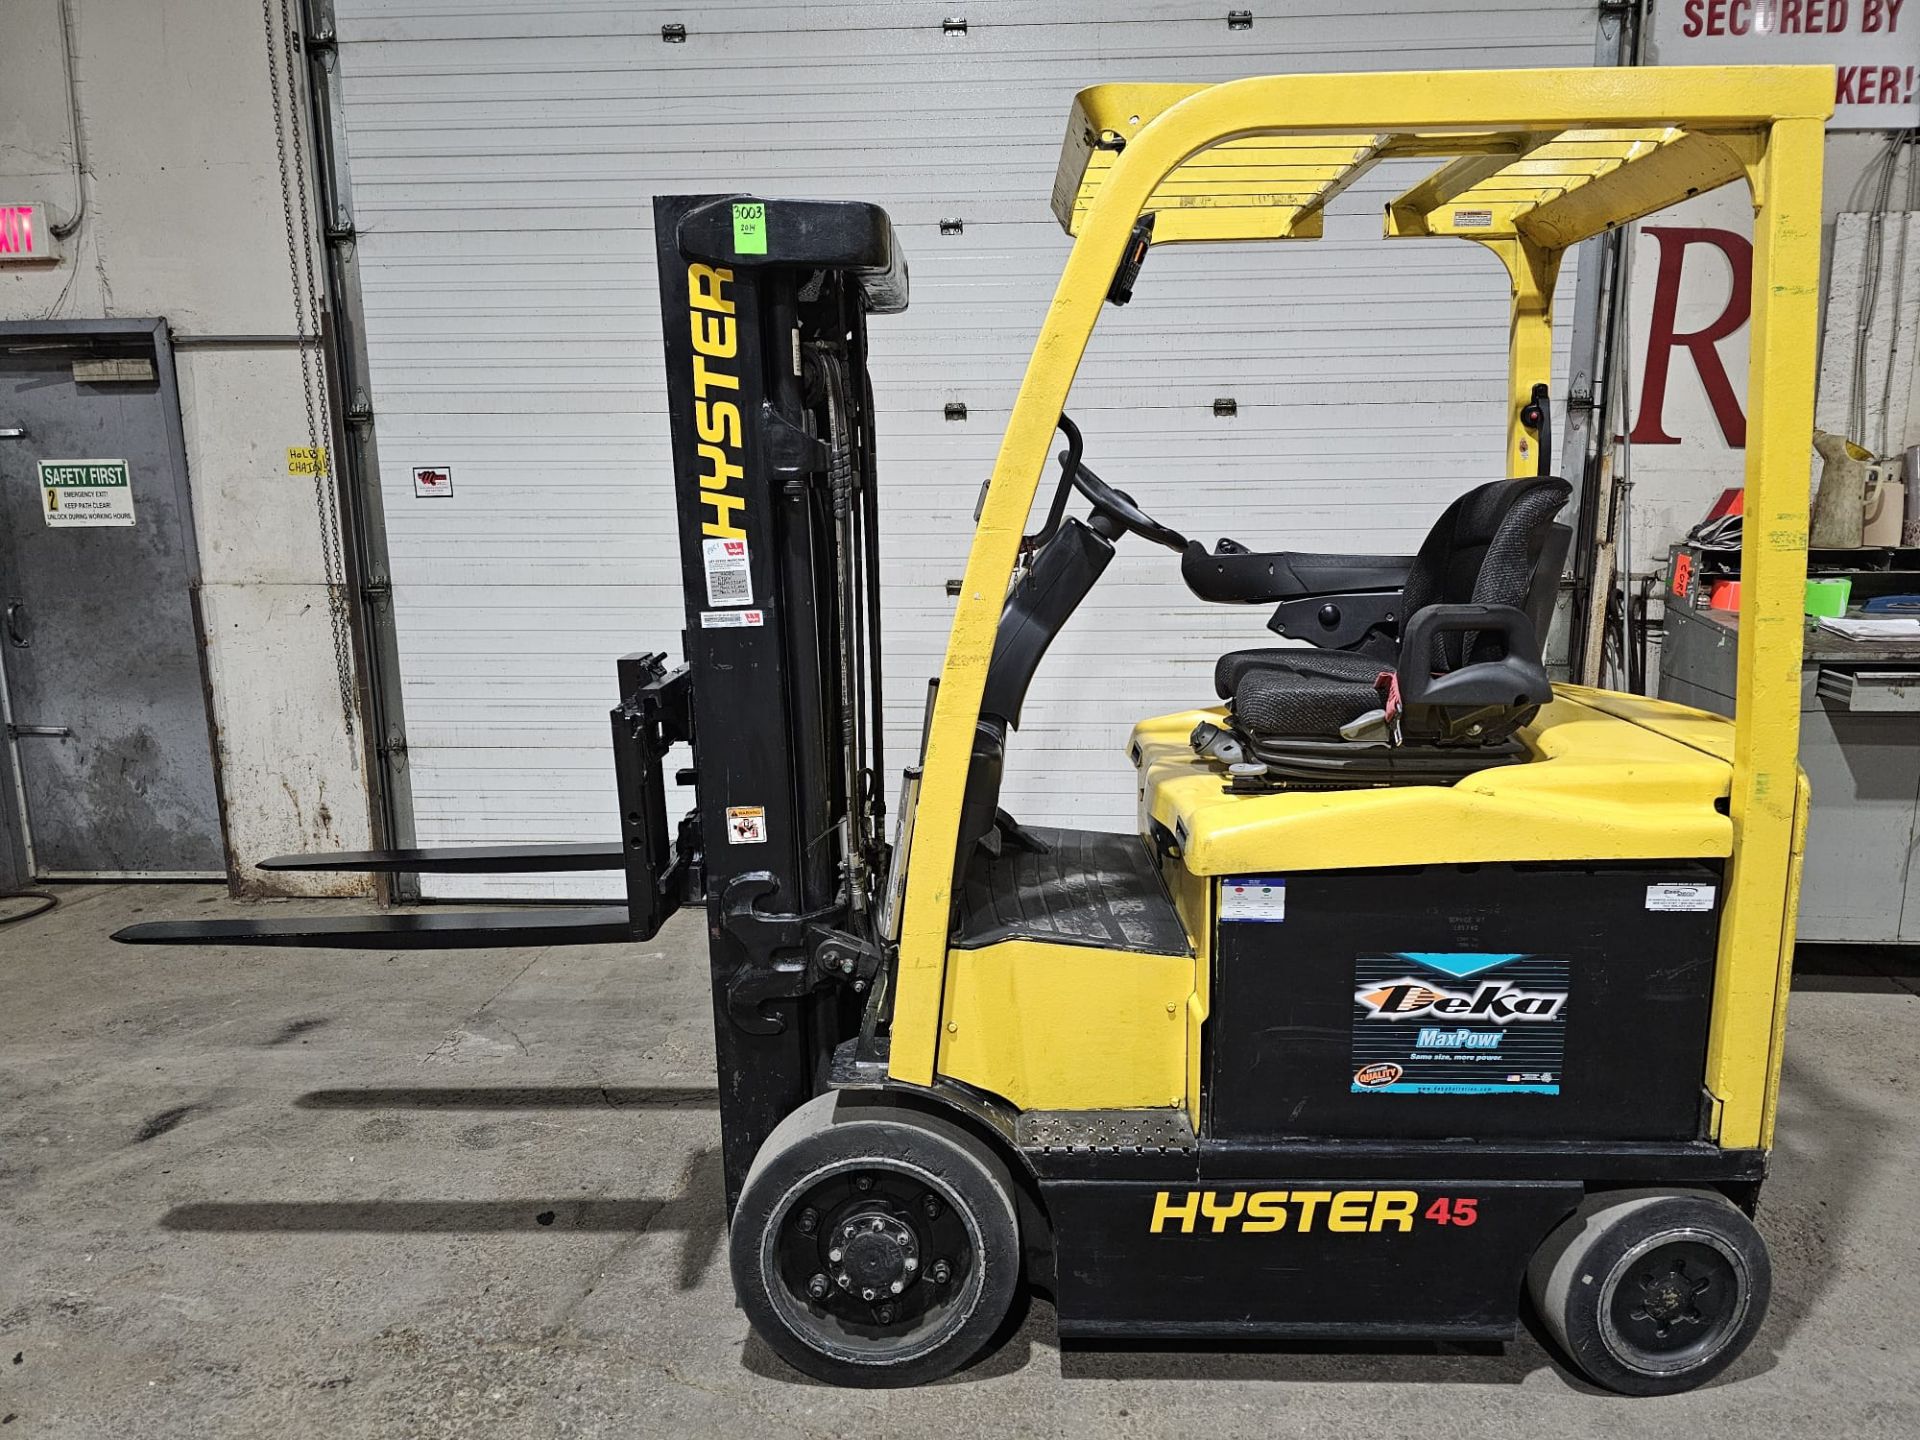 2014 Hyster 4,500lbs Capacity Forklift Electric 48V with sideshift & 4 functions & 3-STAGE MAST 189"